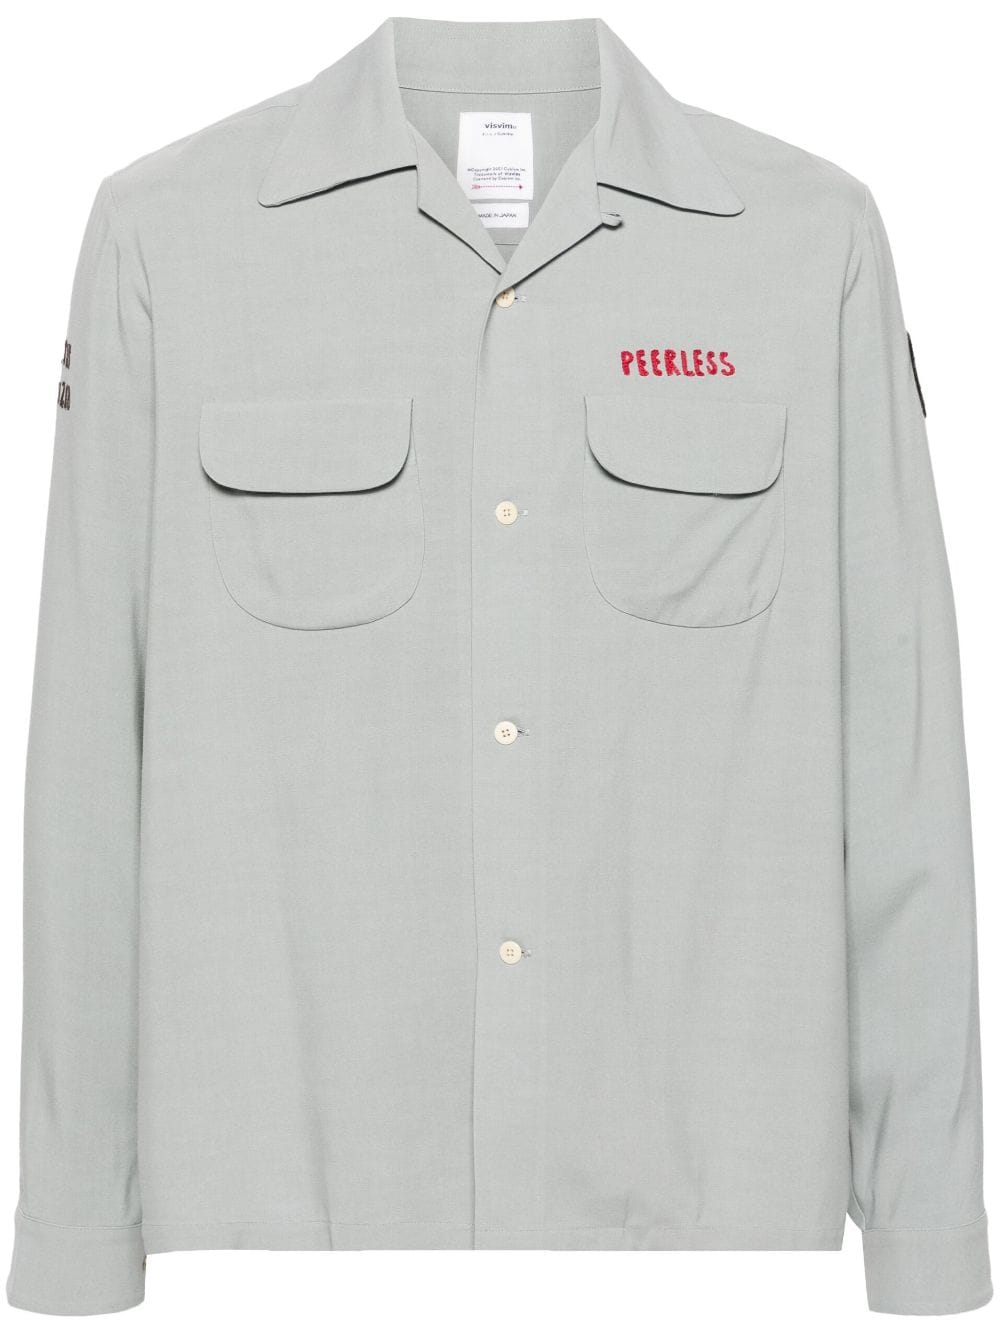 Keesey logo-embroidered shirt